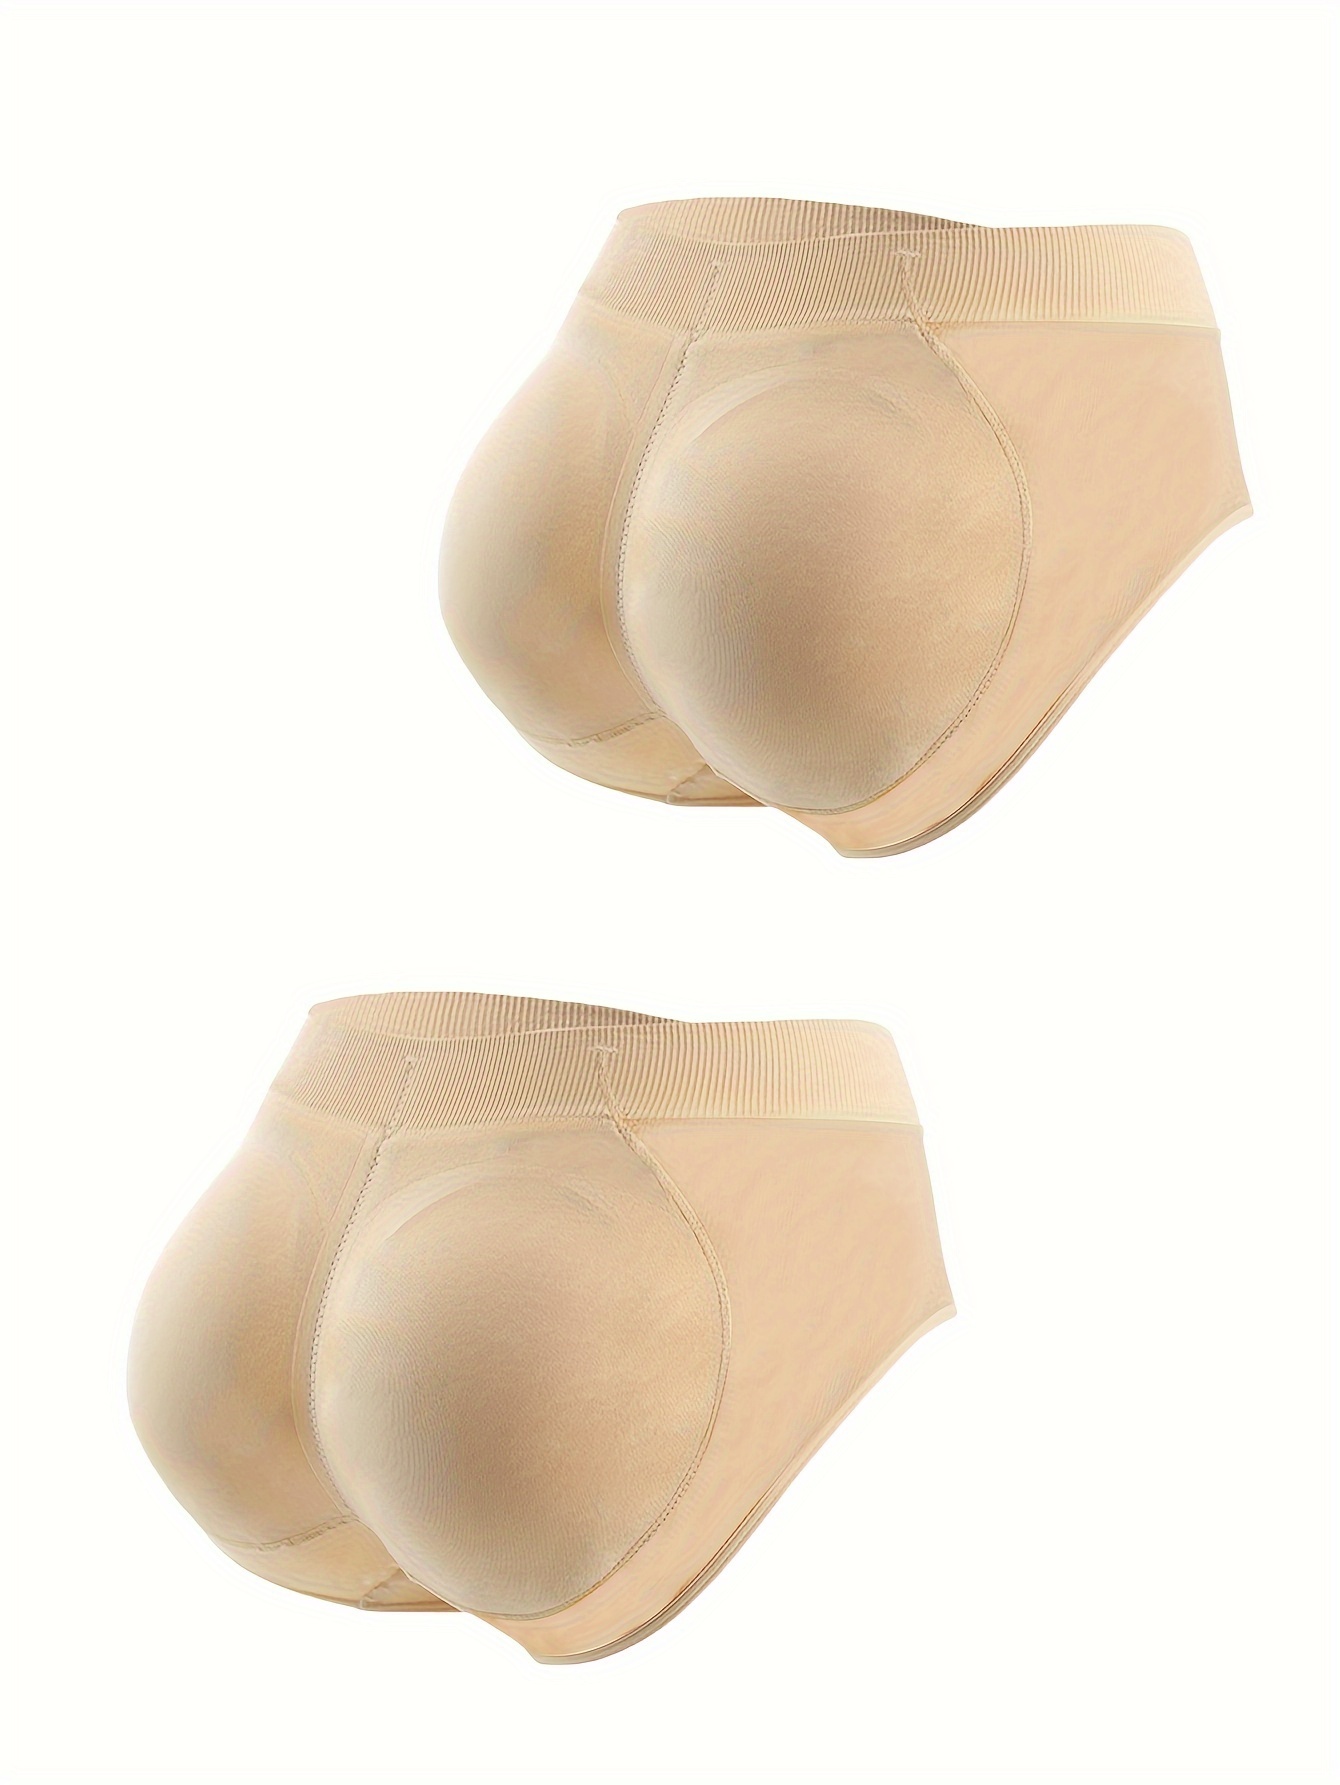 Skin-colored Silicone Butt Lifter Panties For Women, Butt Enhancer Shapewear